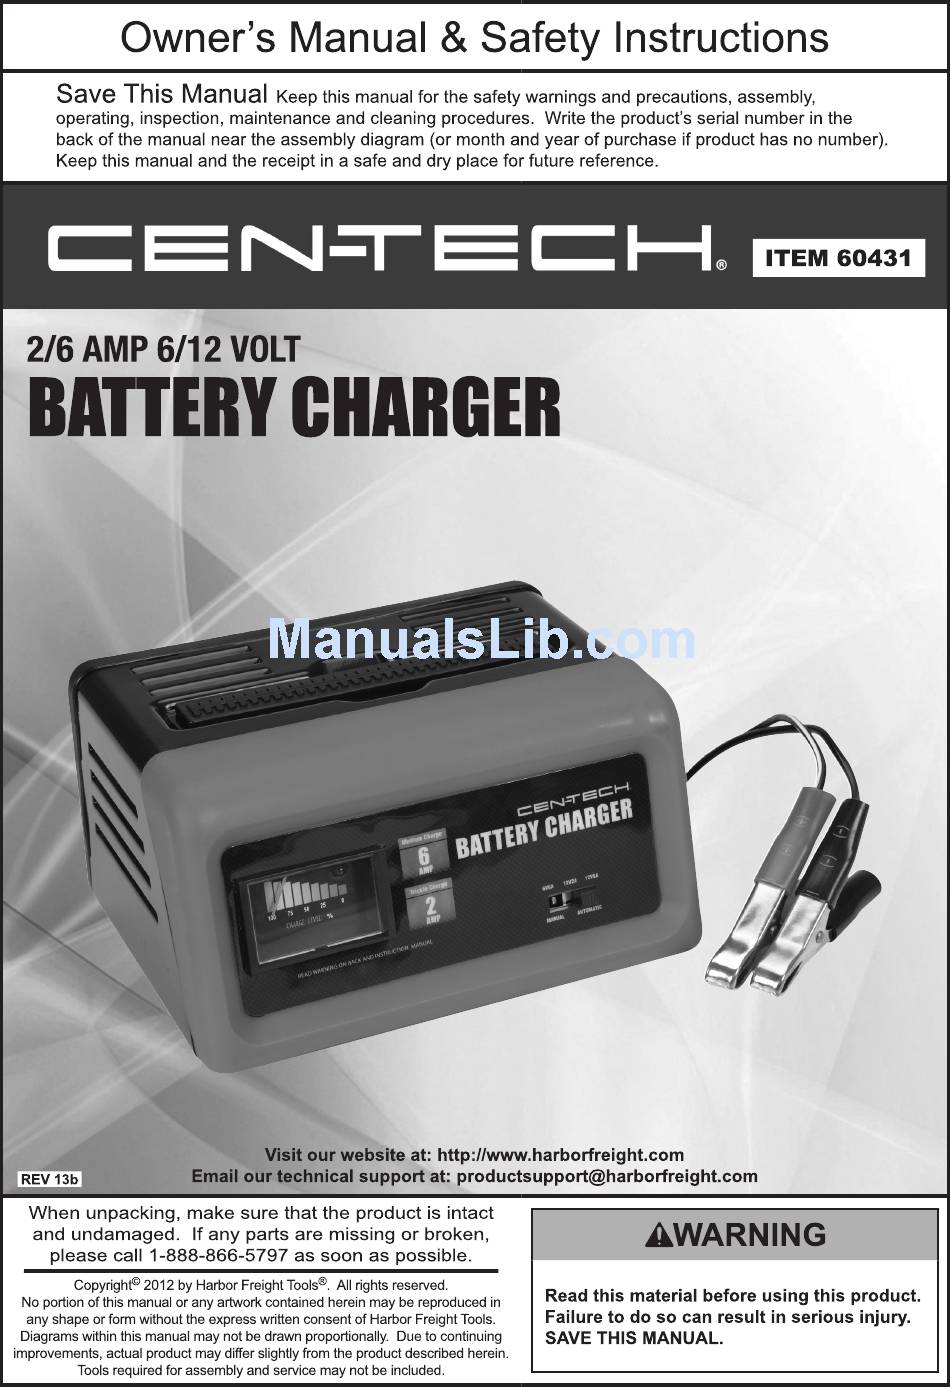 CEN-TECH 60431 OWNER'S MANUAL & SAFETY INSTRUCTIONS Pdf Download